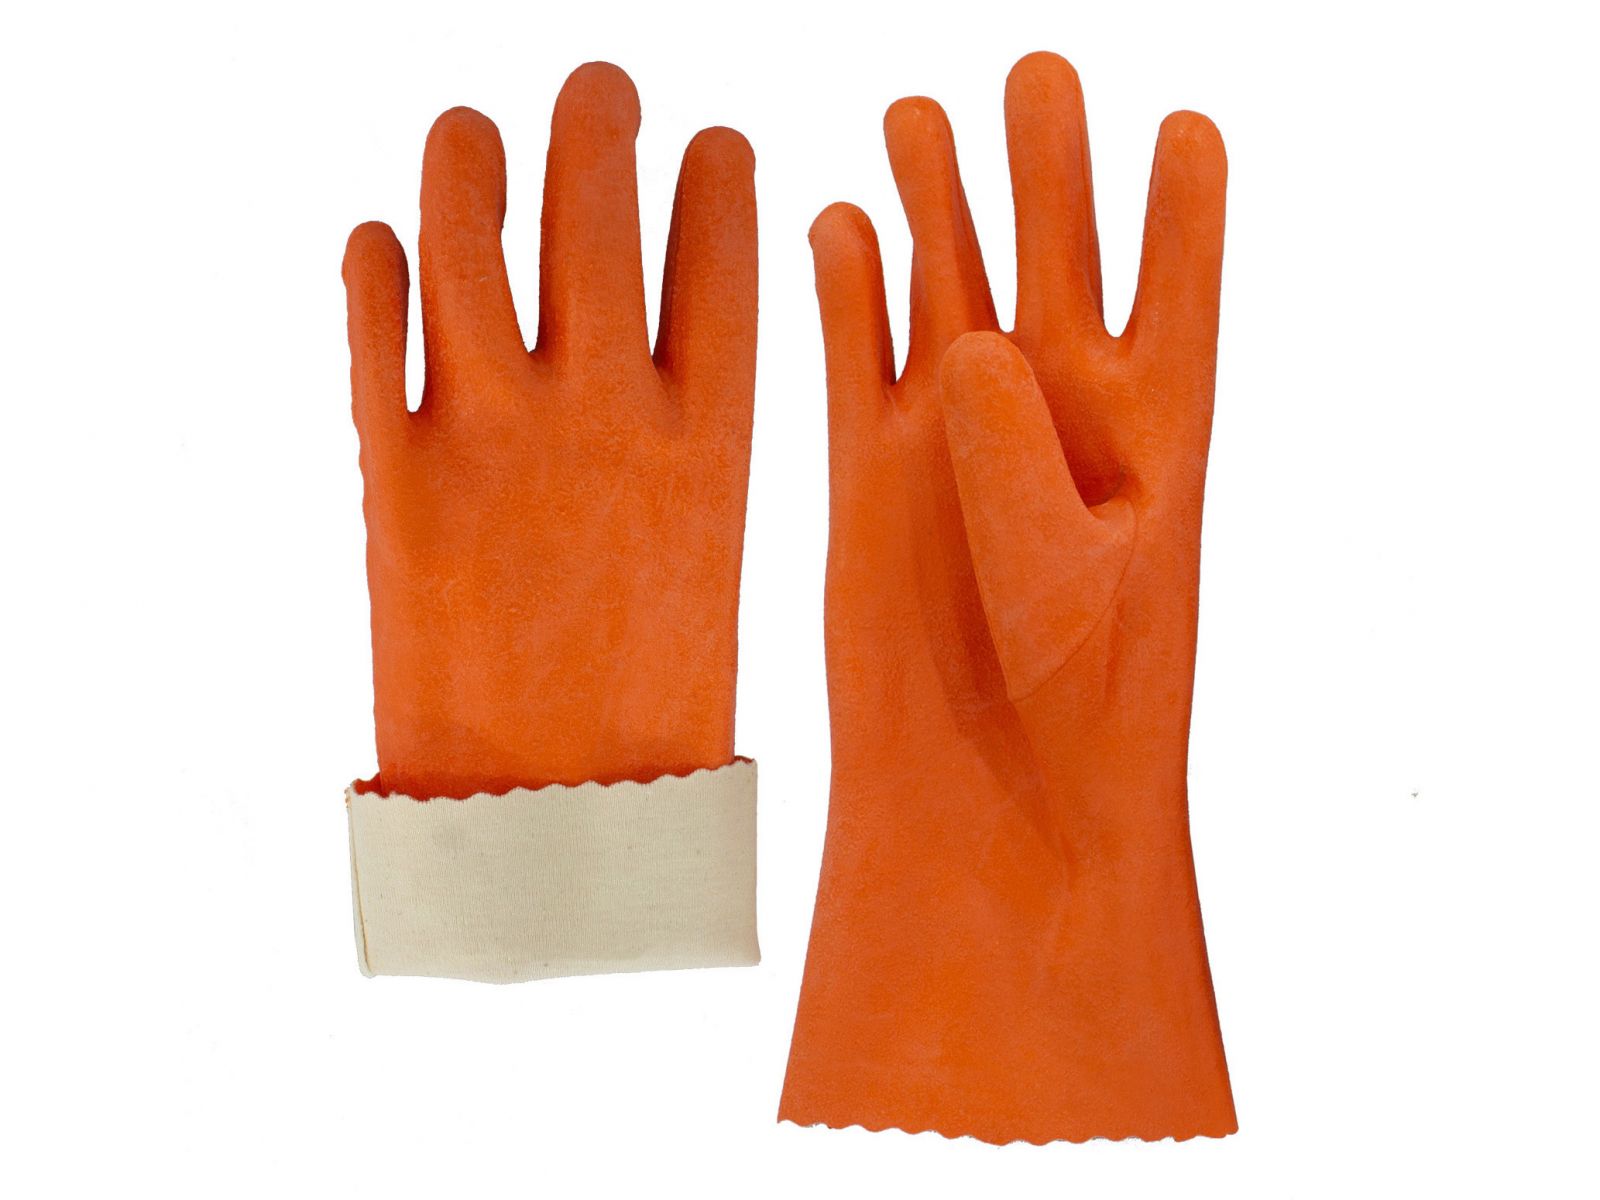 Fabric Gloves are 100% cotton covered with latex rubber